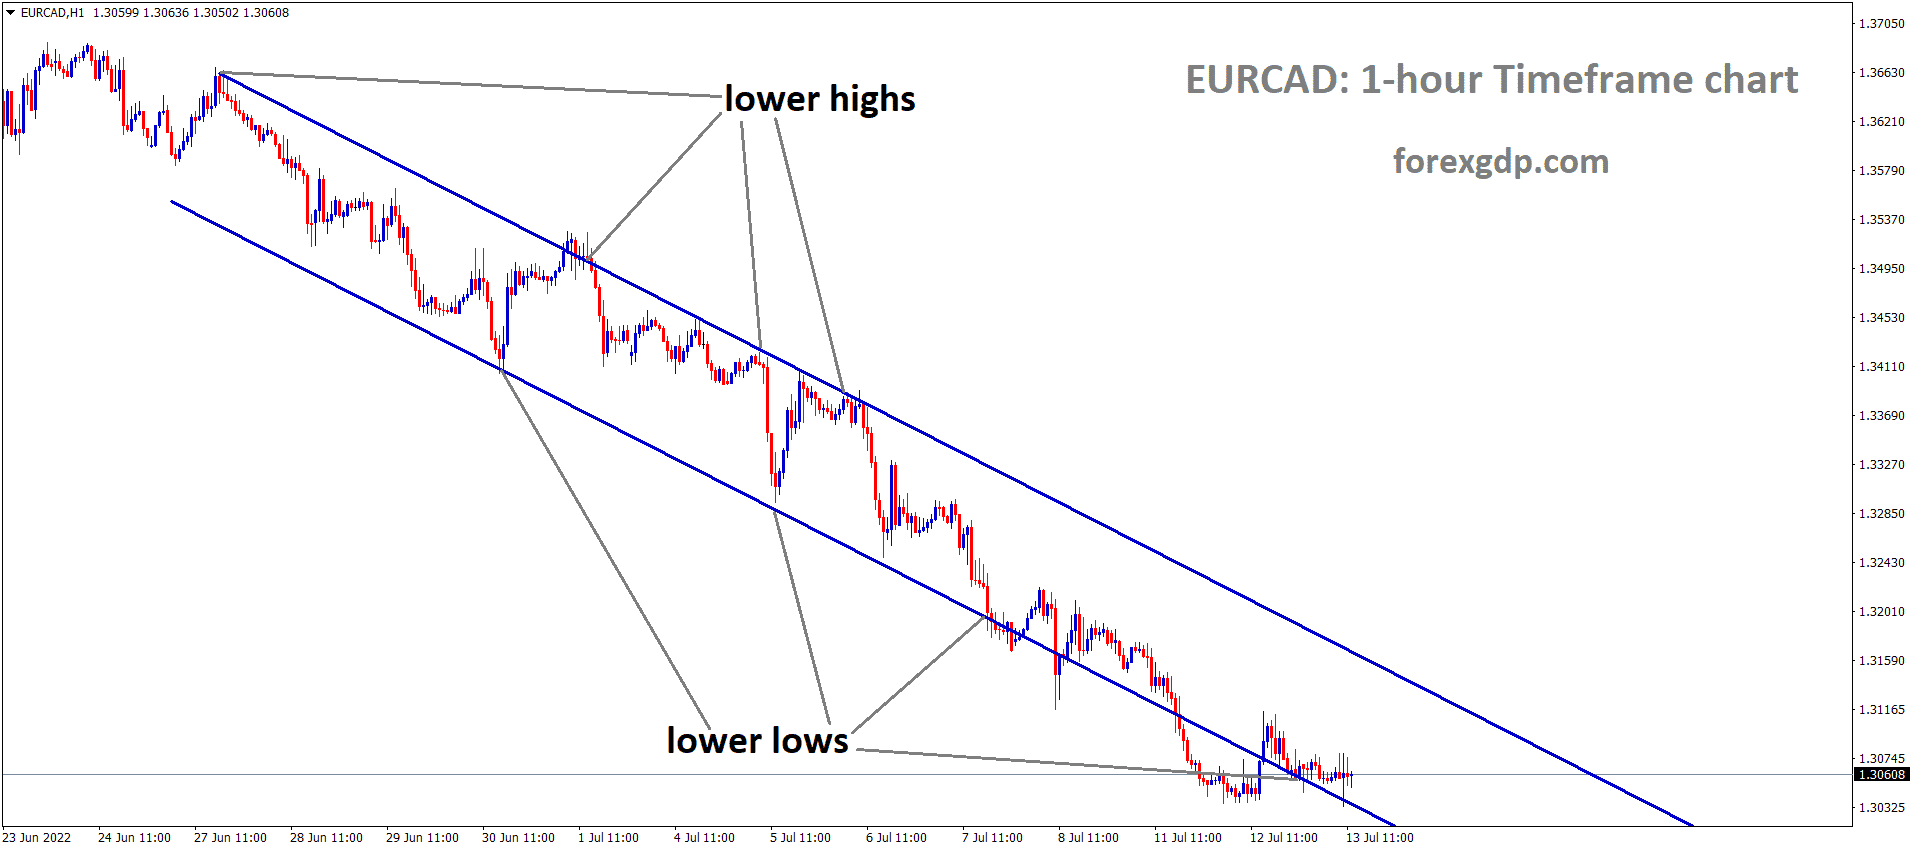 EURCAD is moving in the Descending channel and the market has reached the Lower Low area of the channel